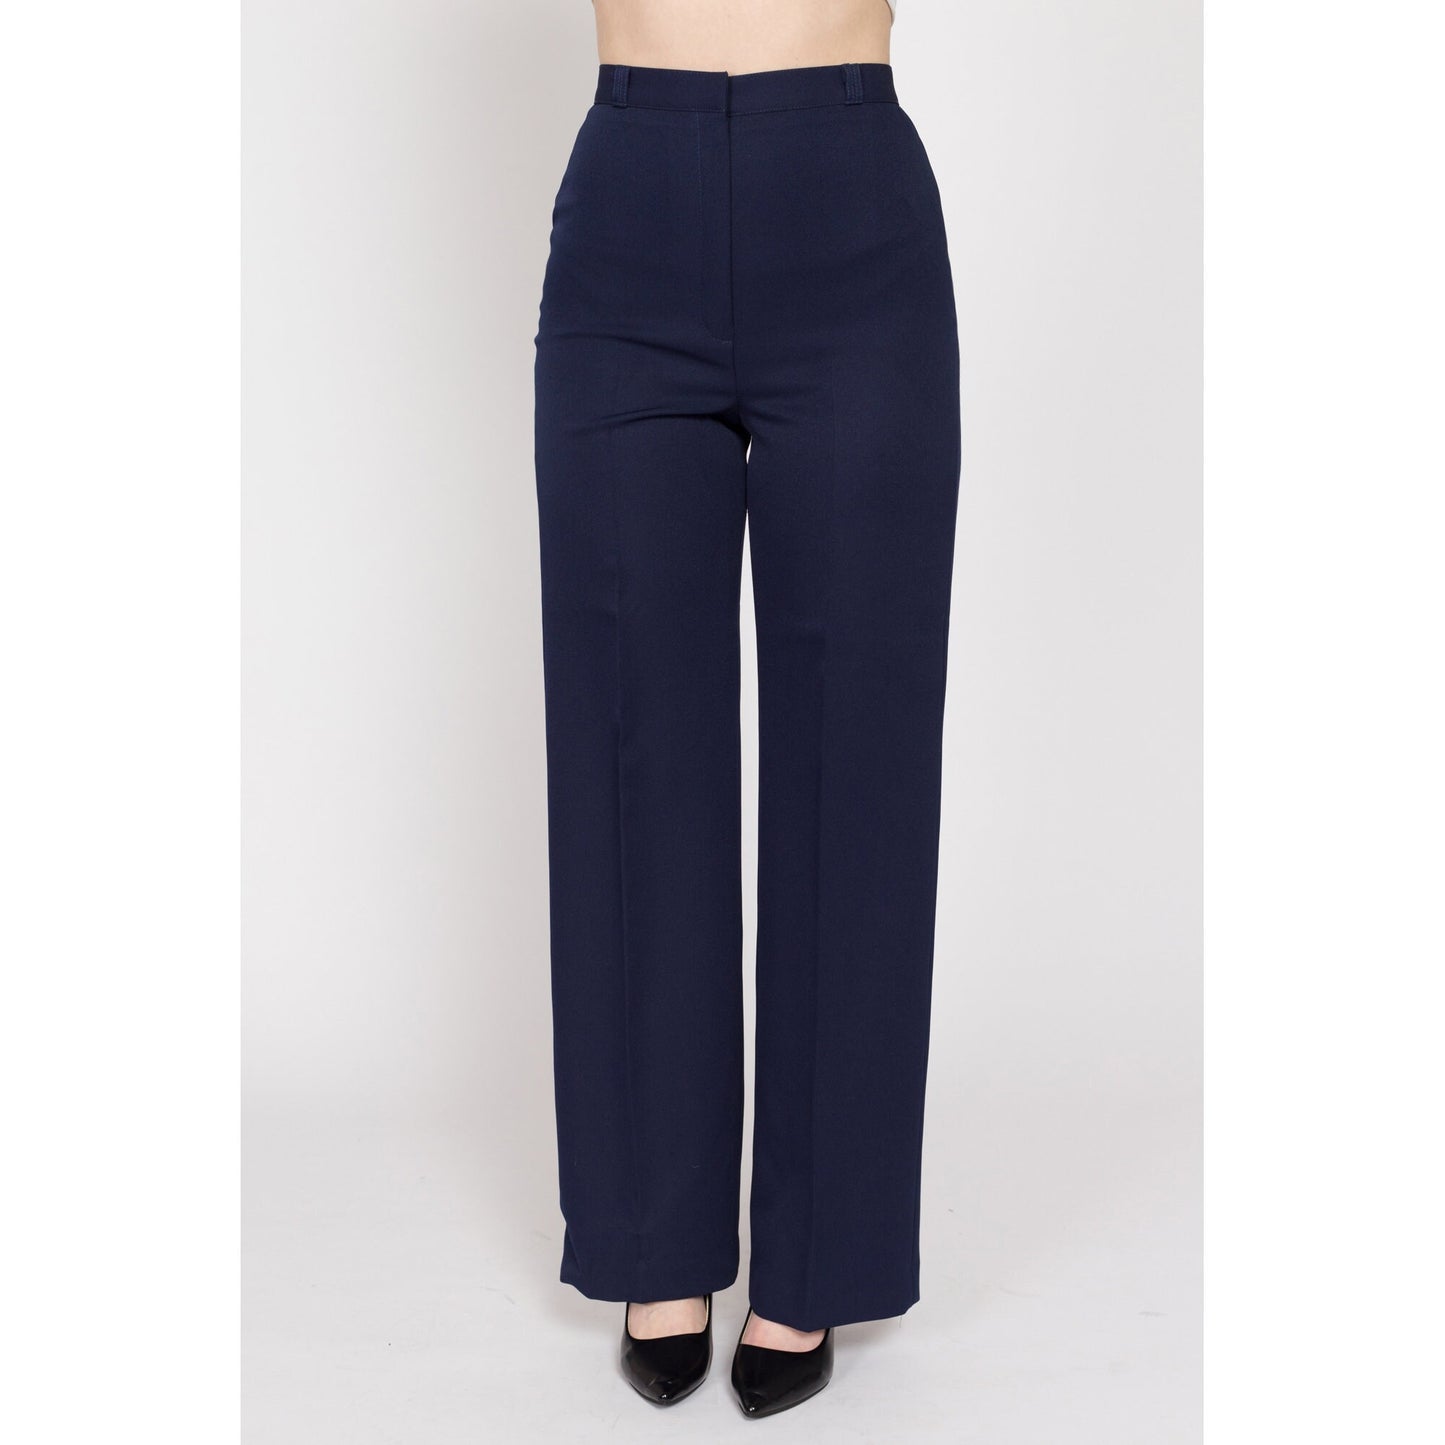 Small 70s Navy Blue High Waisted Trousers NWT 26.5" | Retro Vintage Panther Straight Leg Polyester Pants